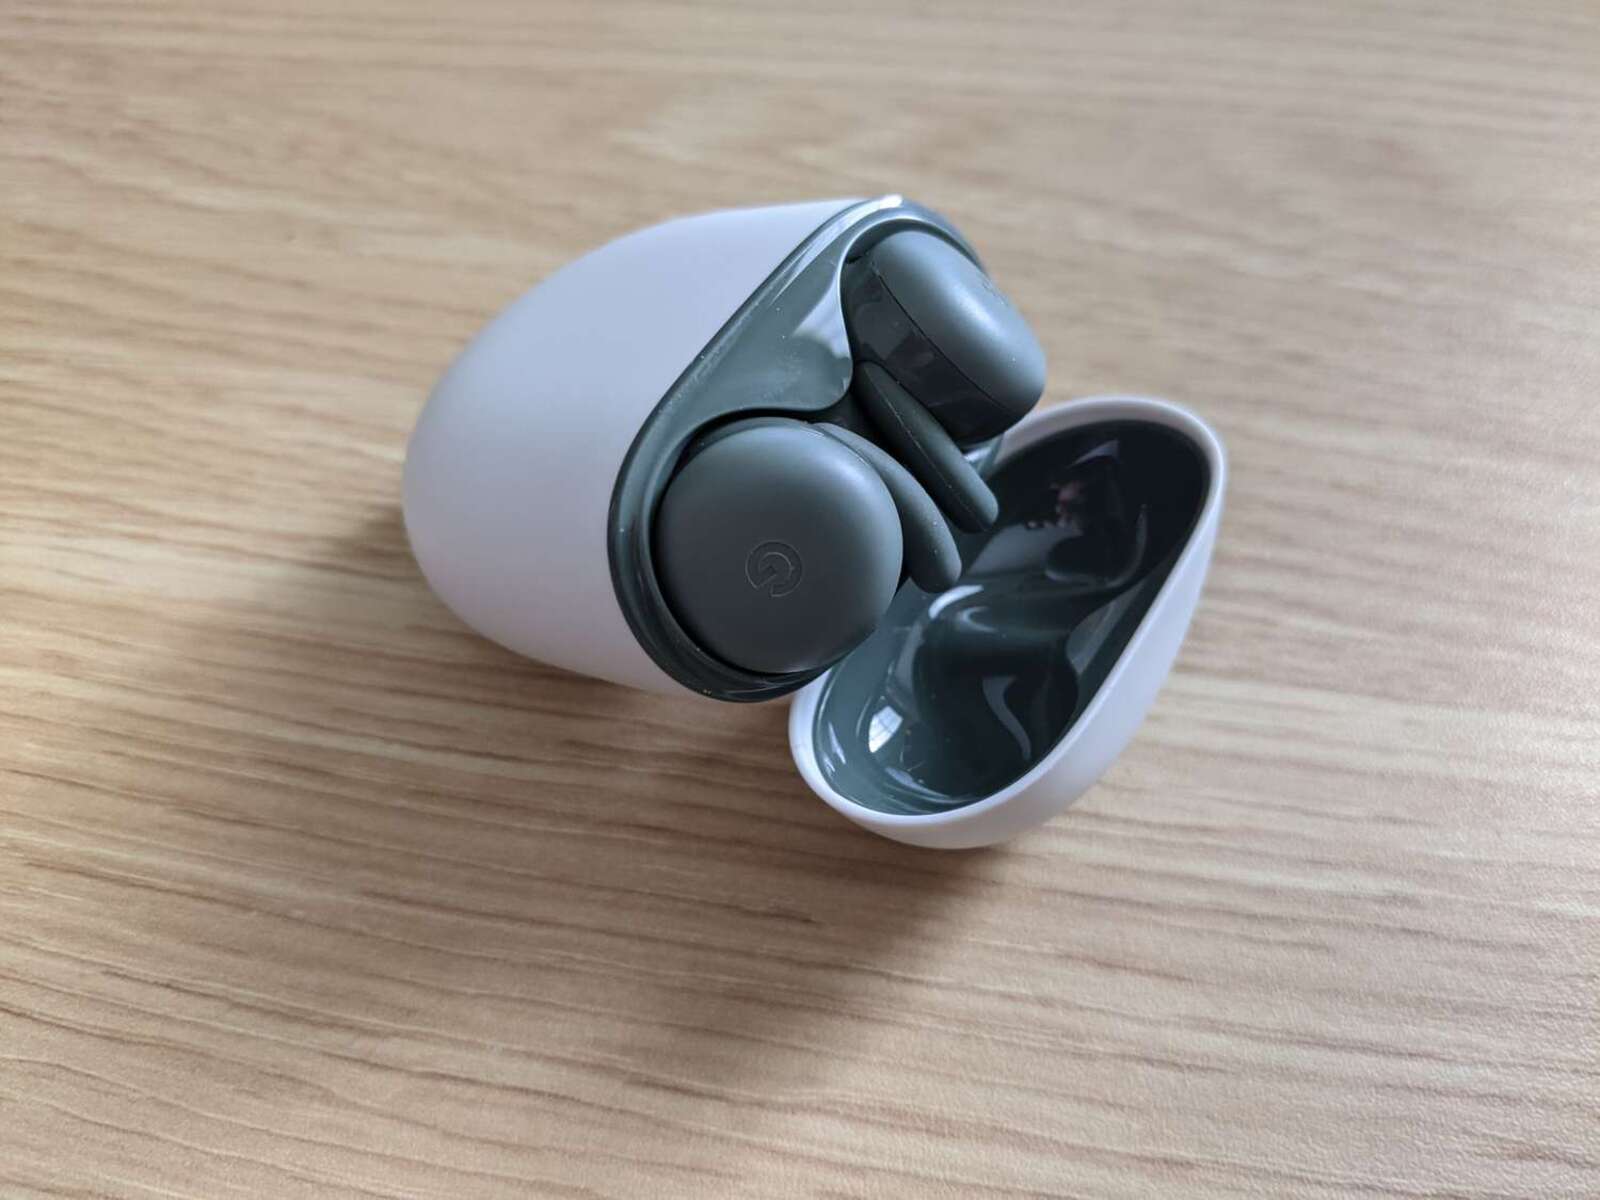 How To Fix Pixel Buds That Don’t Connect